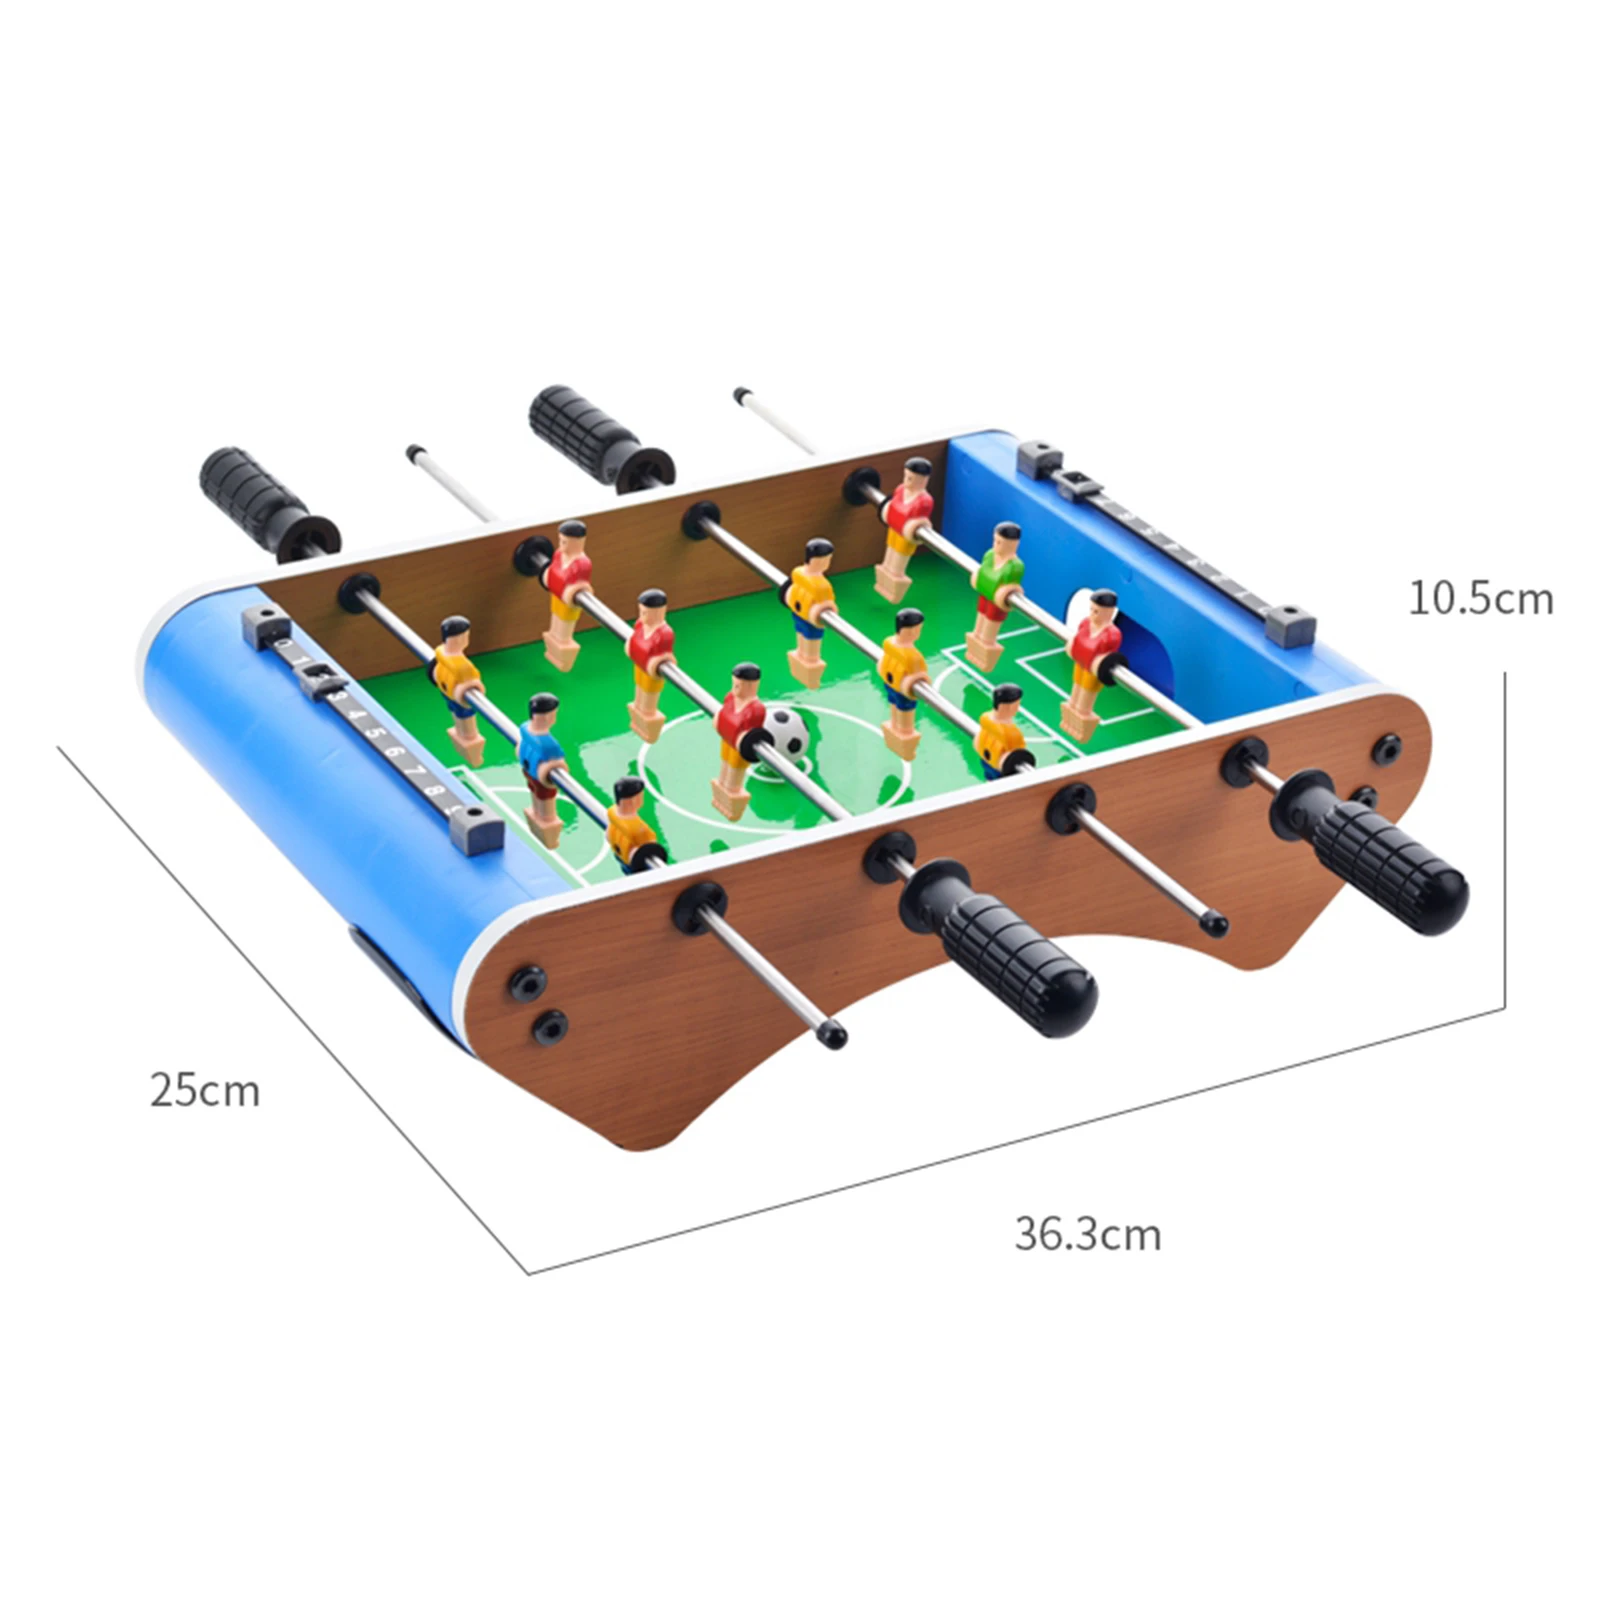 Table Football Table Games Table Foot Games Suitable for Family Friend Games Board Game